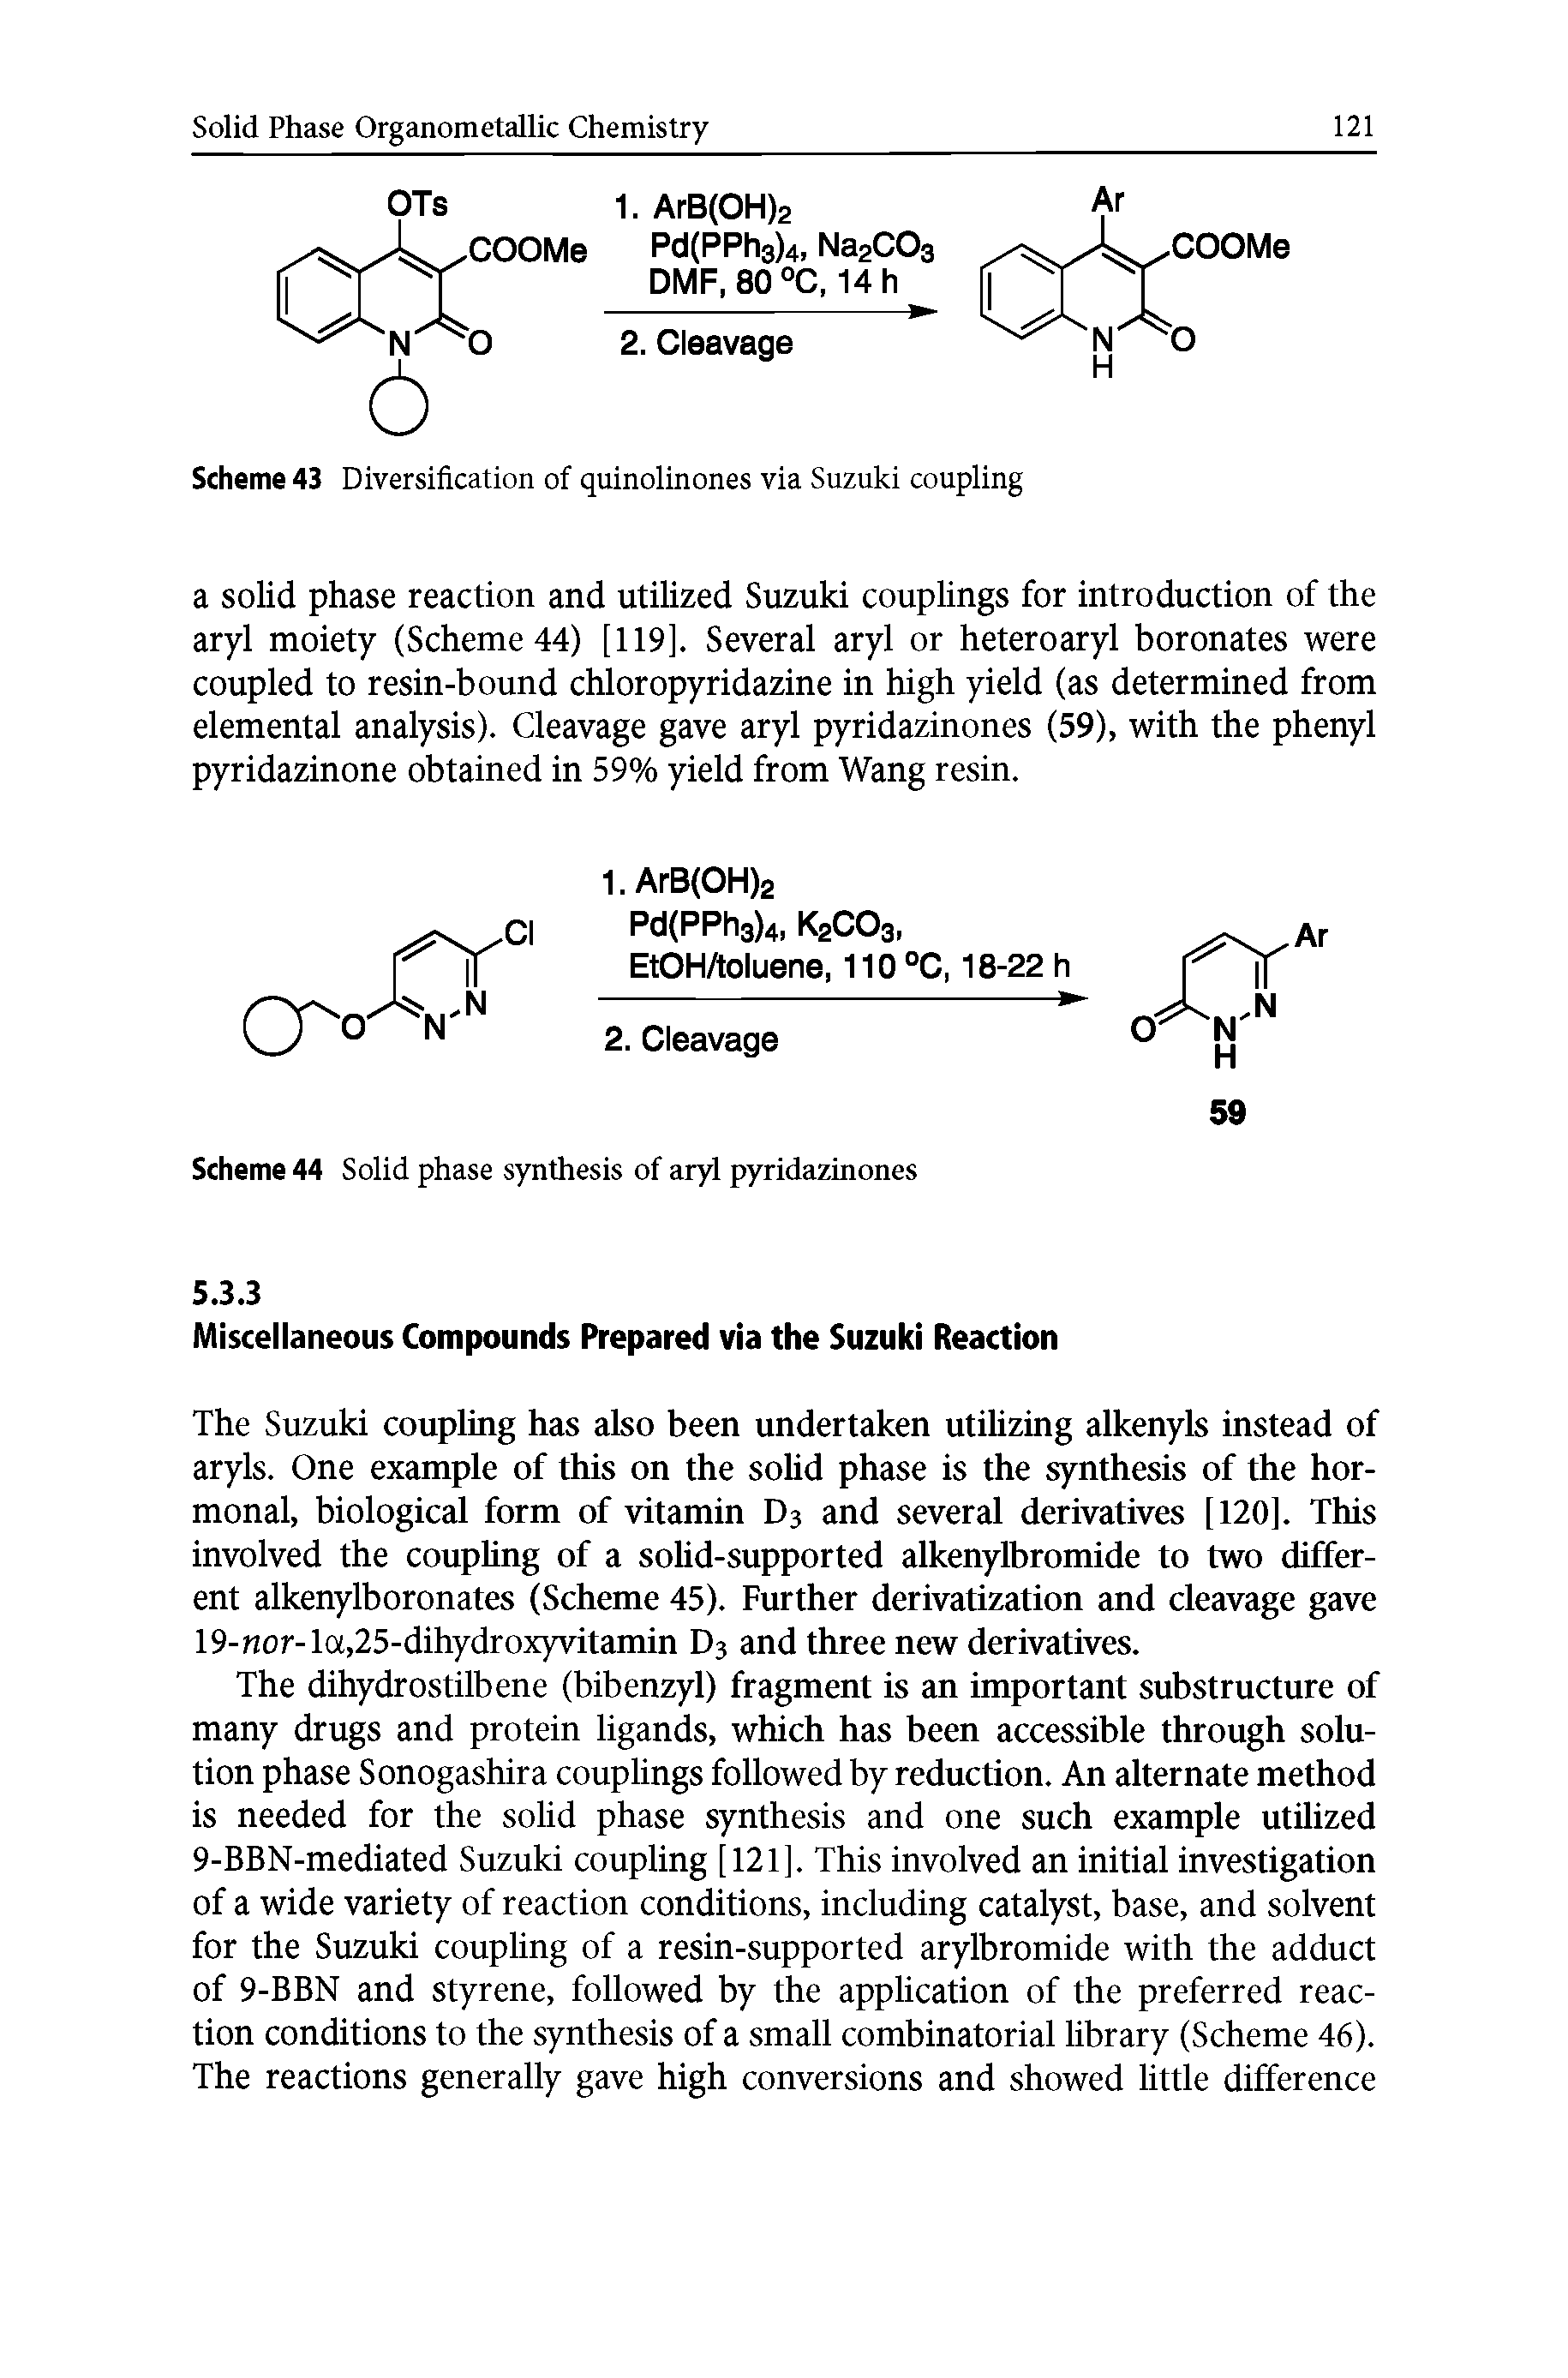 Scheme 44 Solid phase synthesis of aryl pyridazinones...